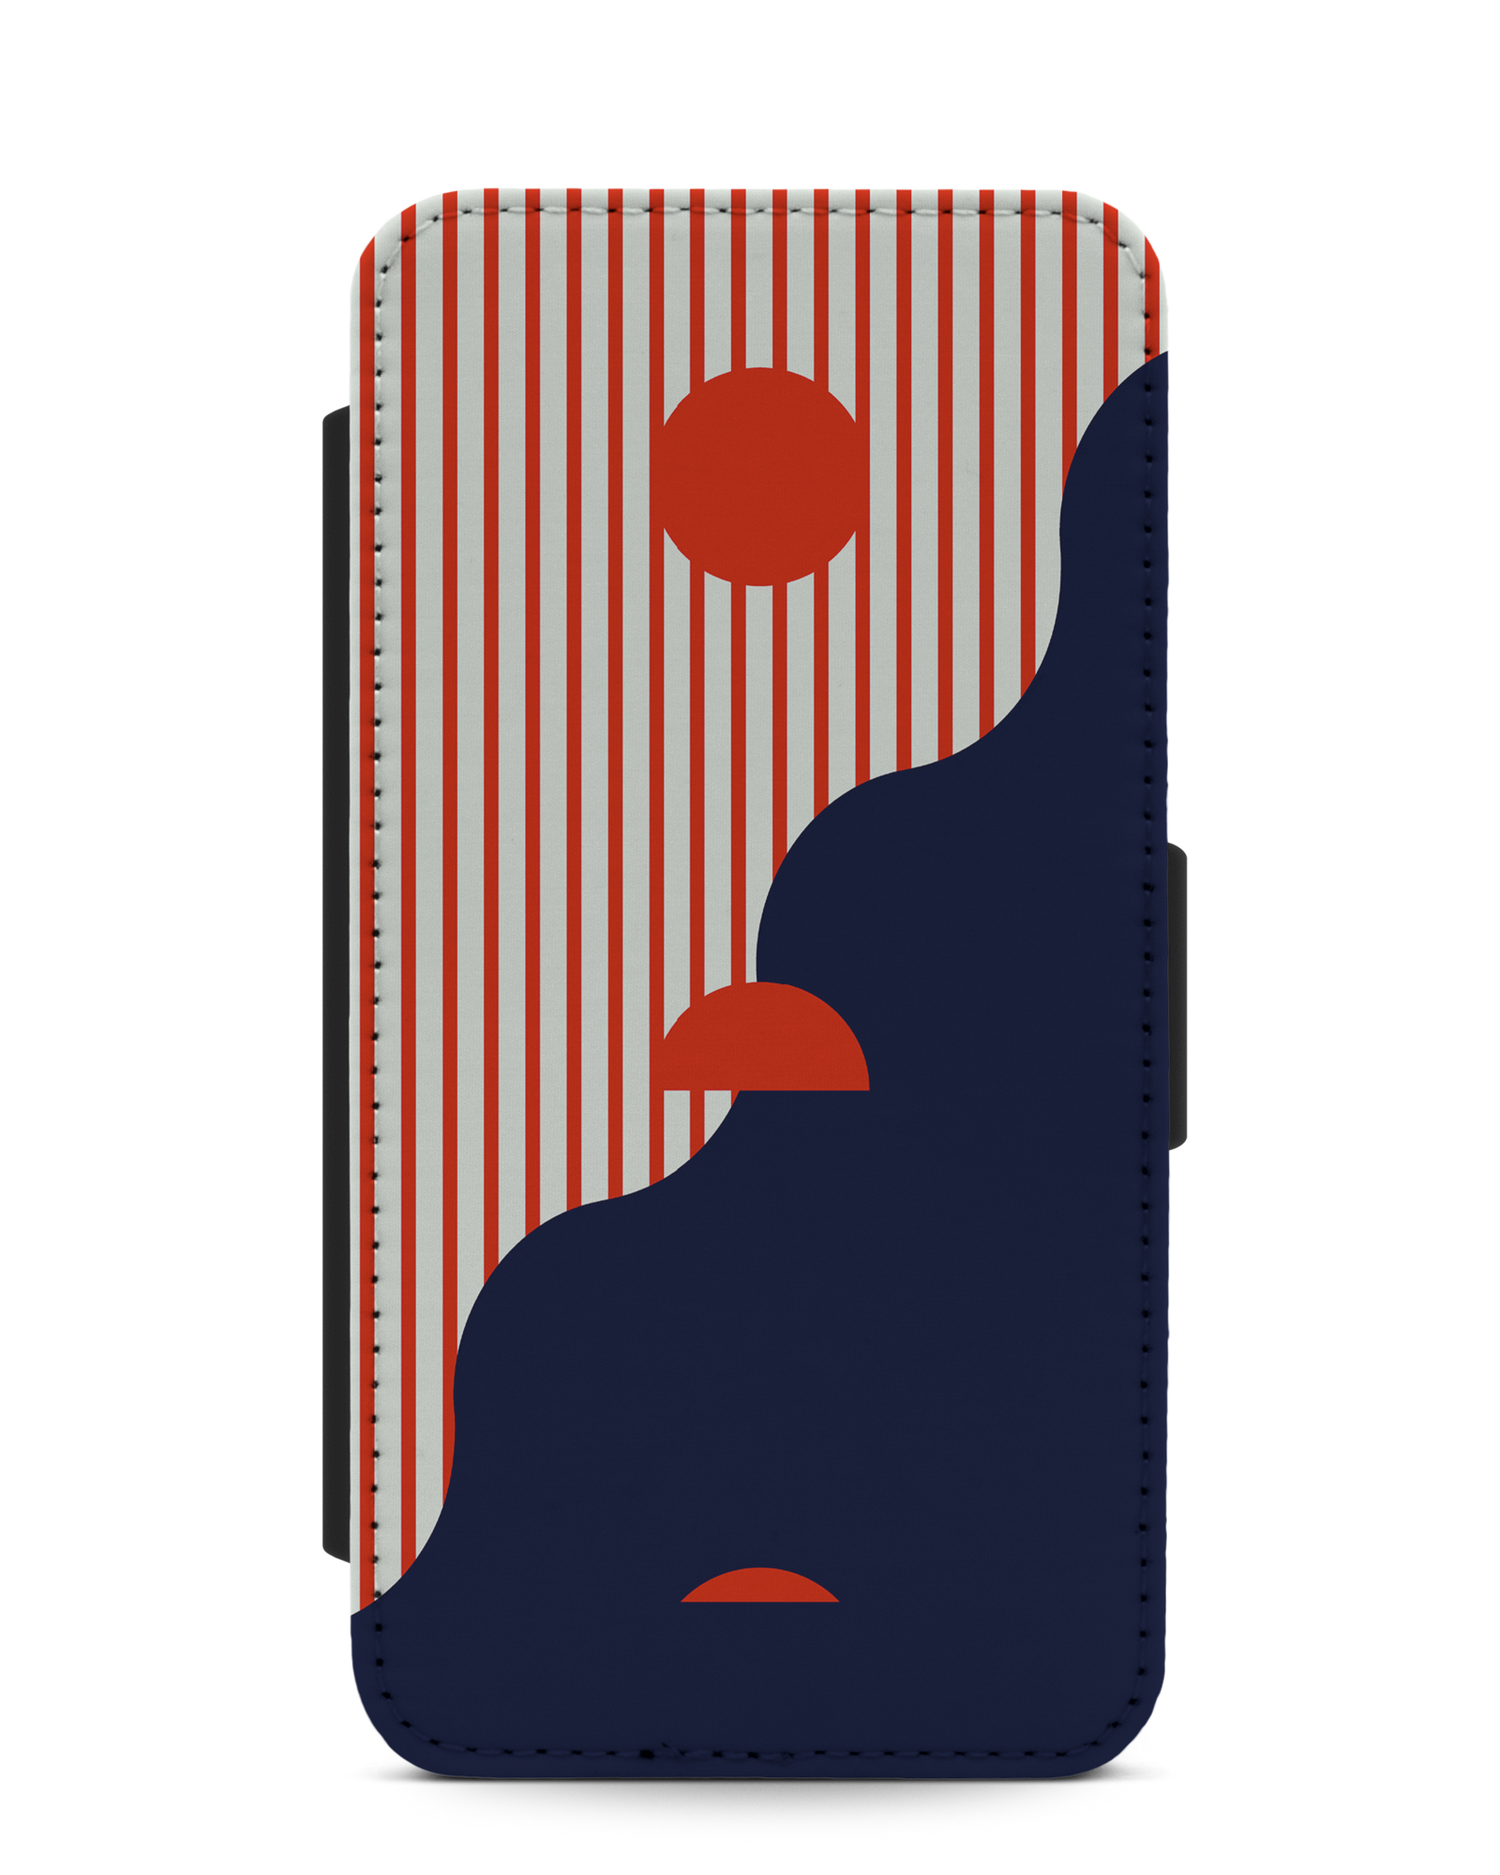 Metric Sunset Wallet Phone Case Samsung Galaxy S10e: Front View